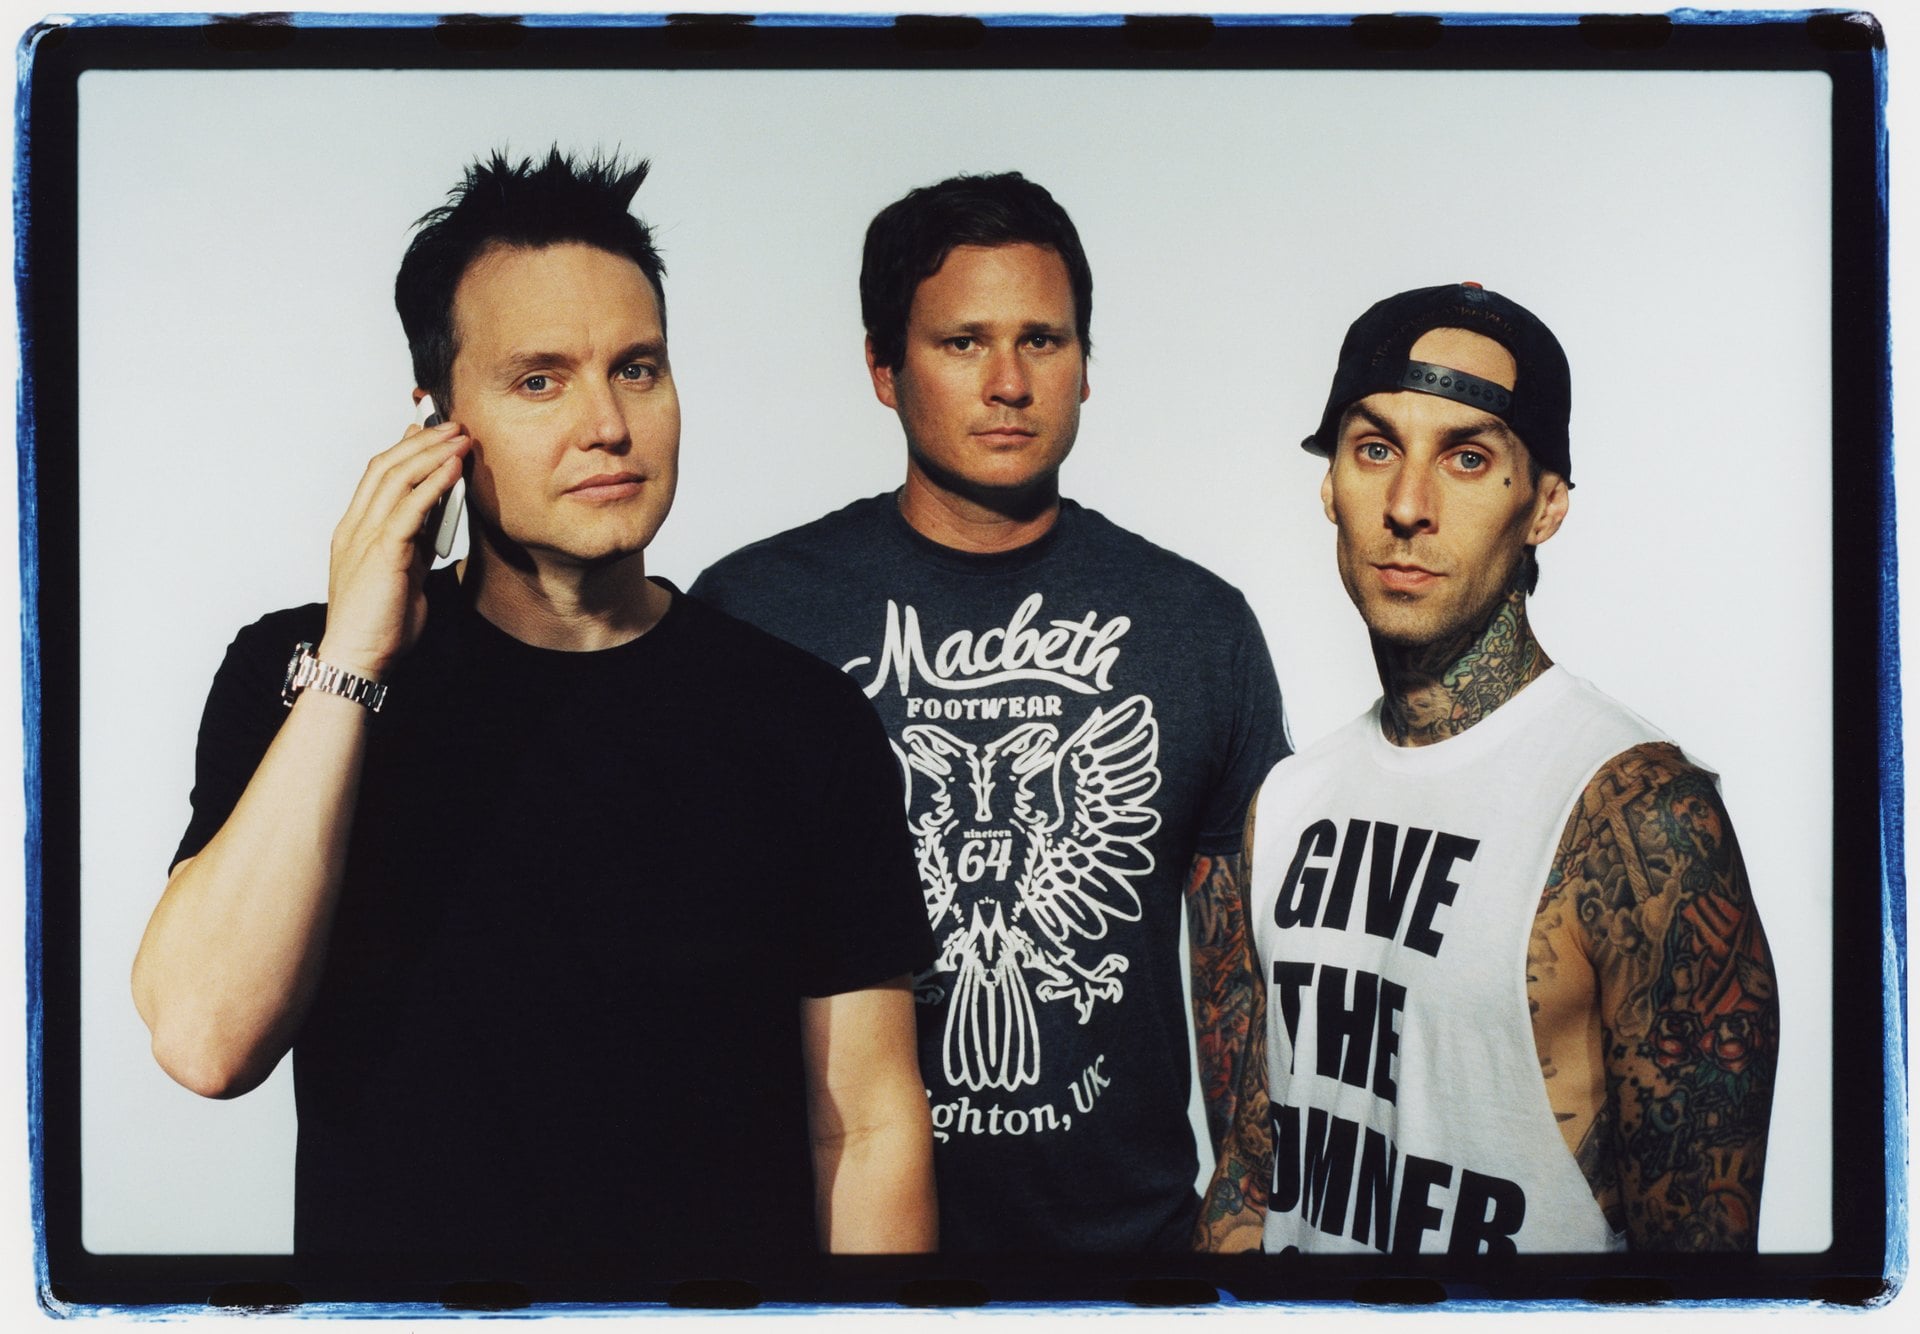 Blink-182 Announce Reunion Tour and New Music: “We’re Coming”